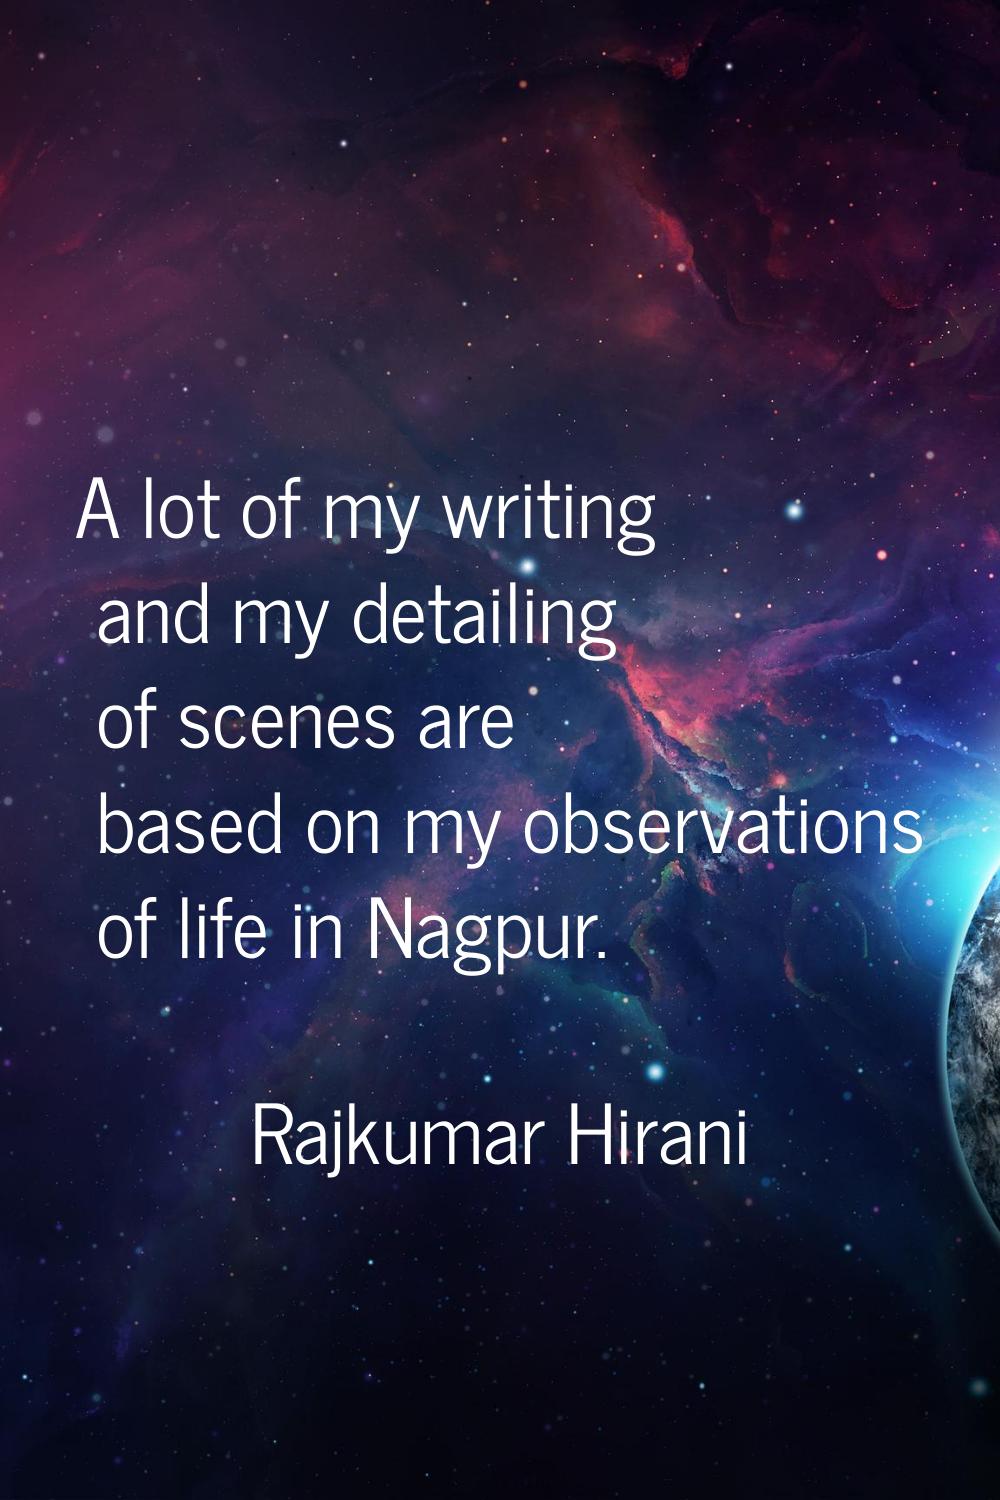 A lot of my writing and my detailing of scenes are based on my observations of life in Nagpur.